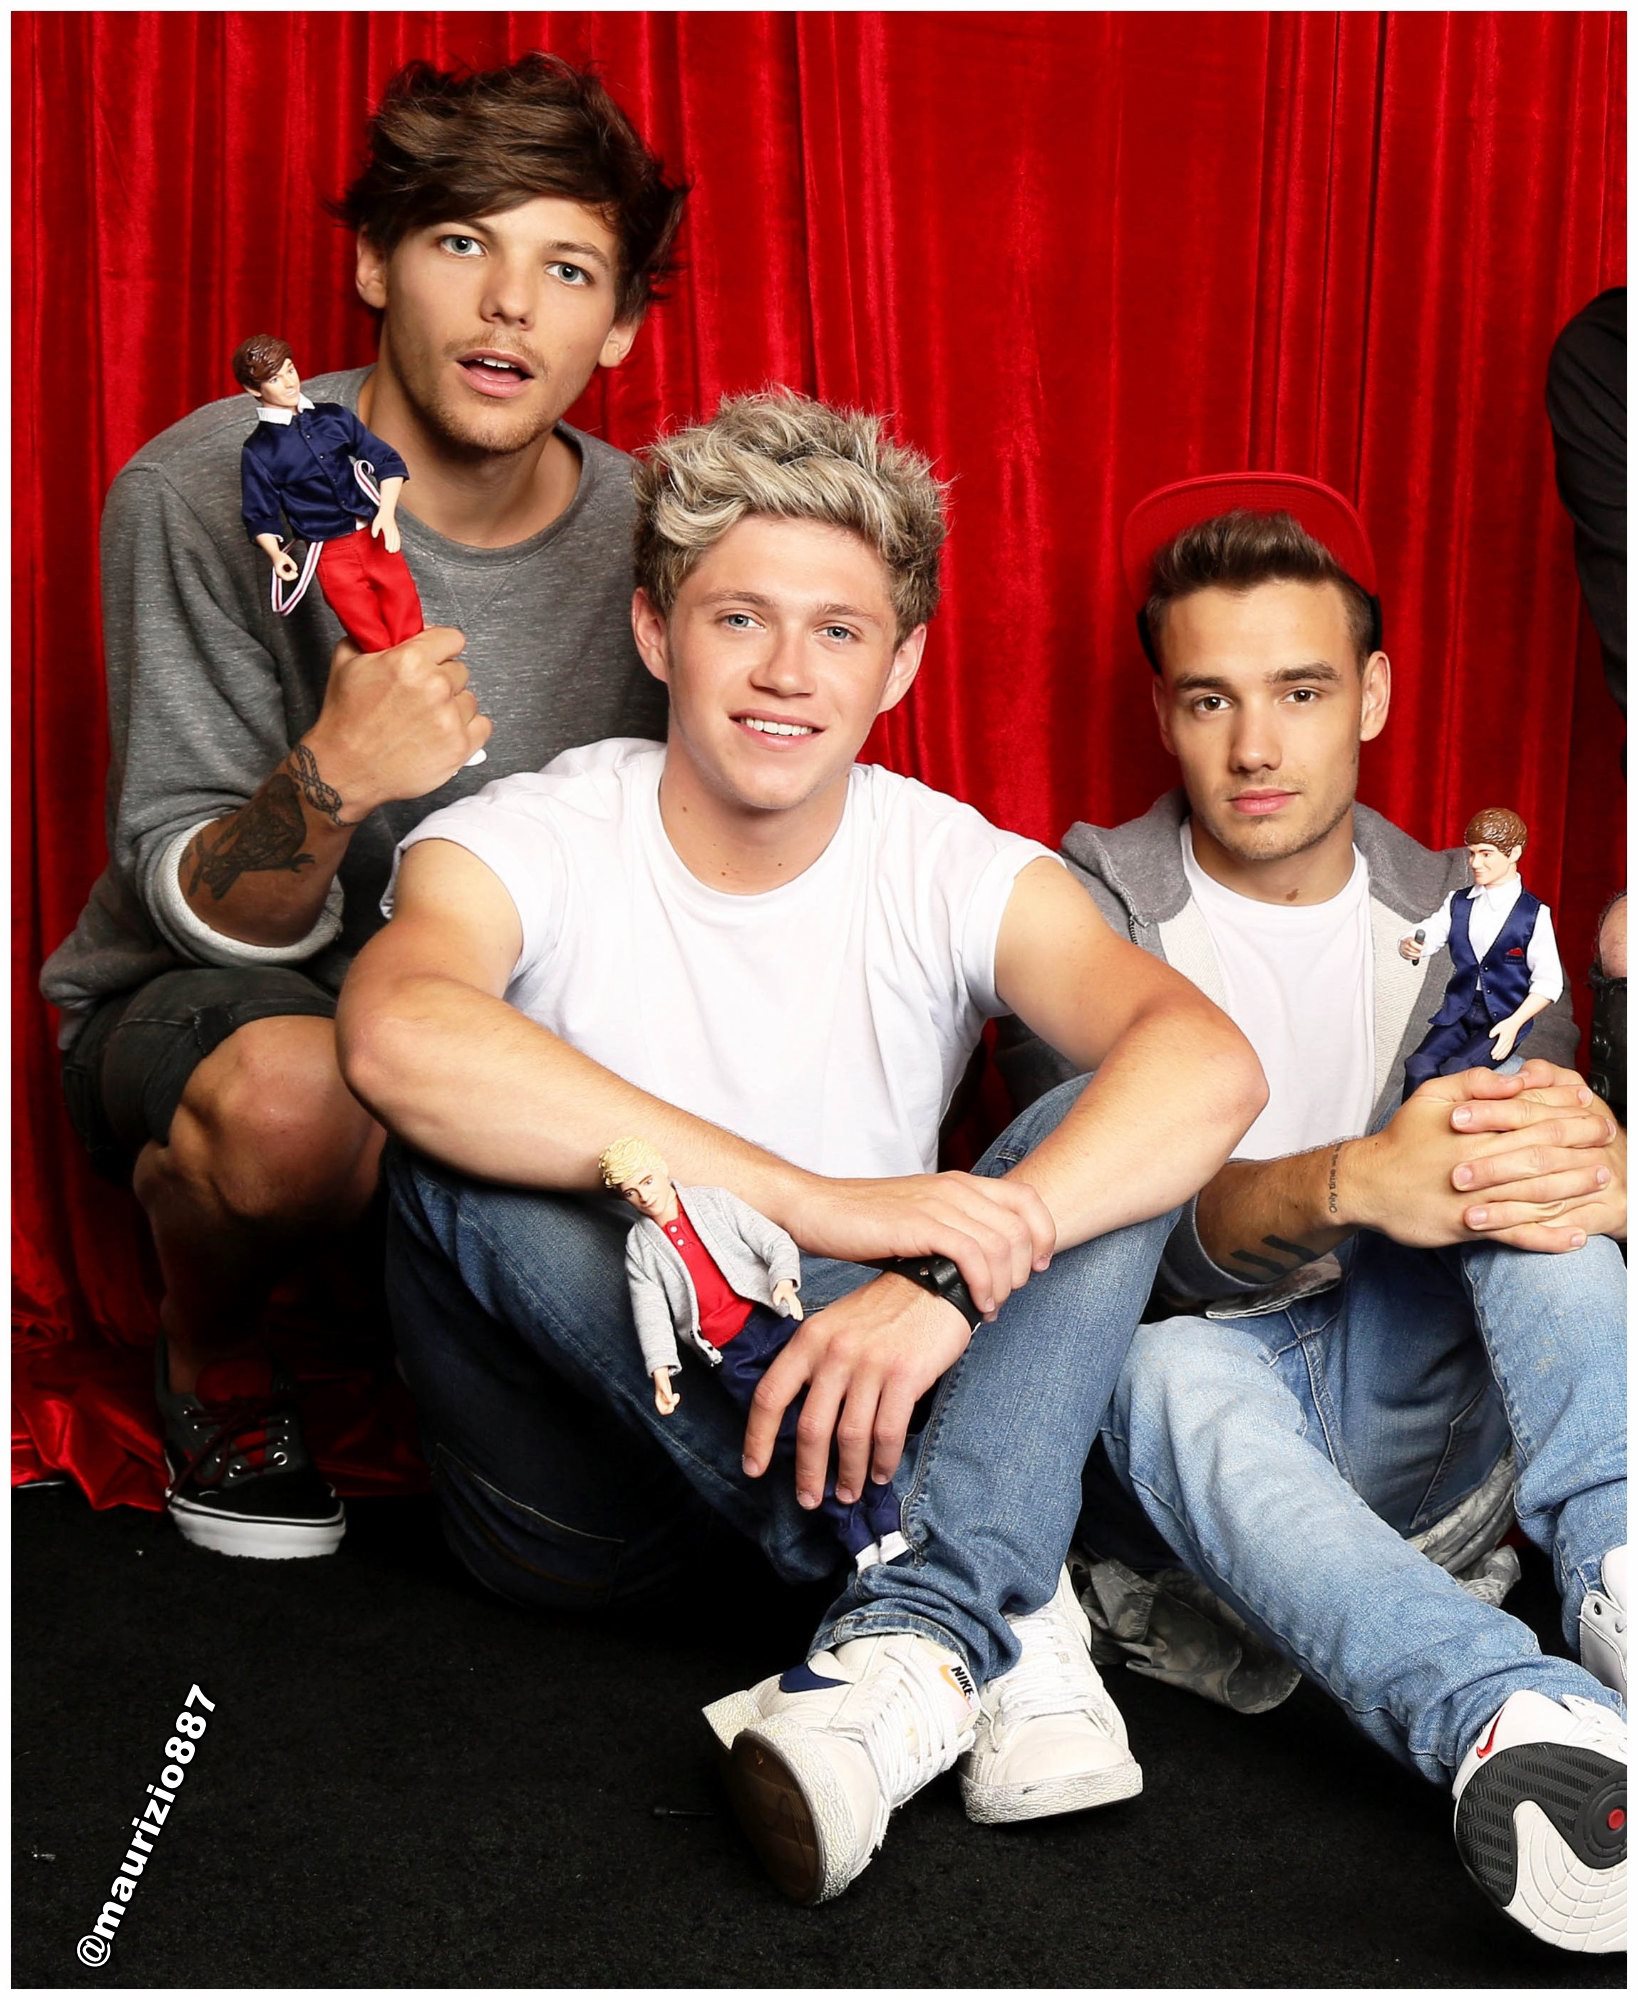 one direction 2013 - One Direction Photo (36008212) - Fanpop